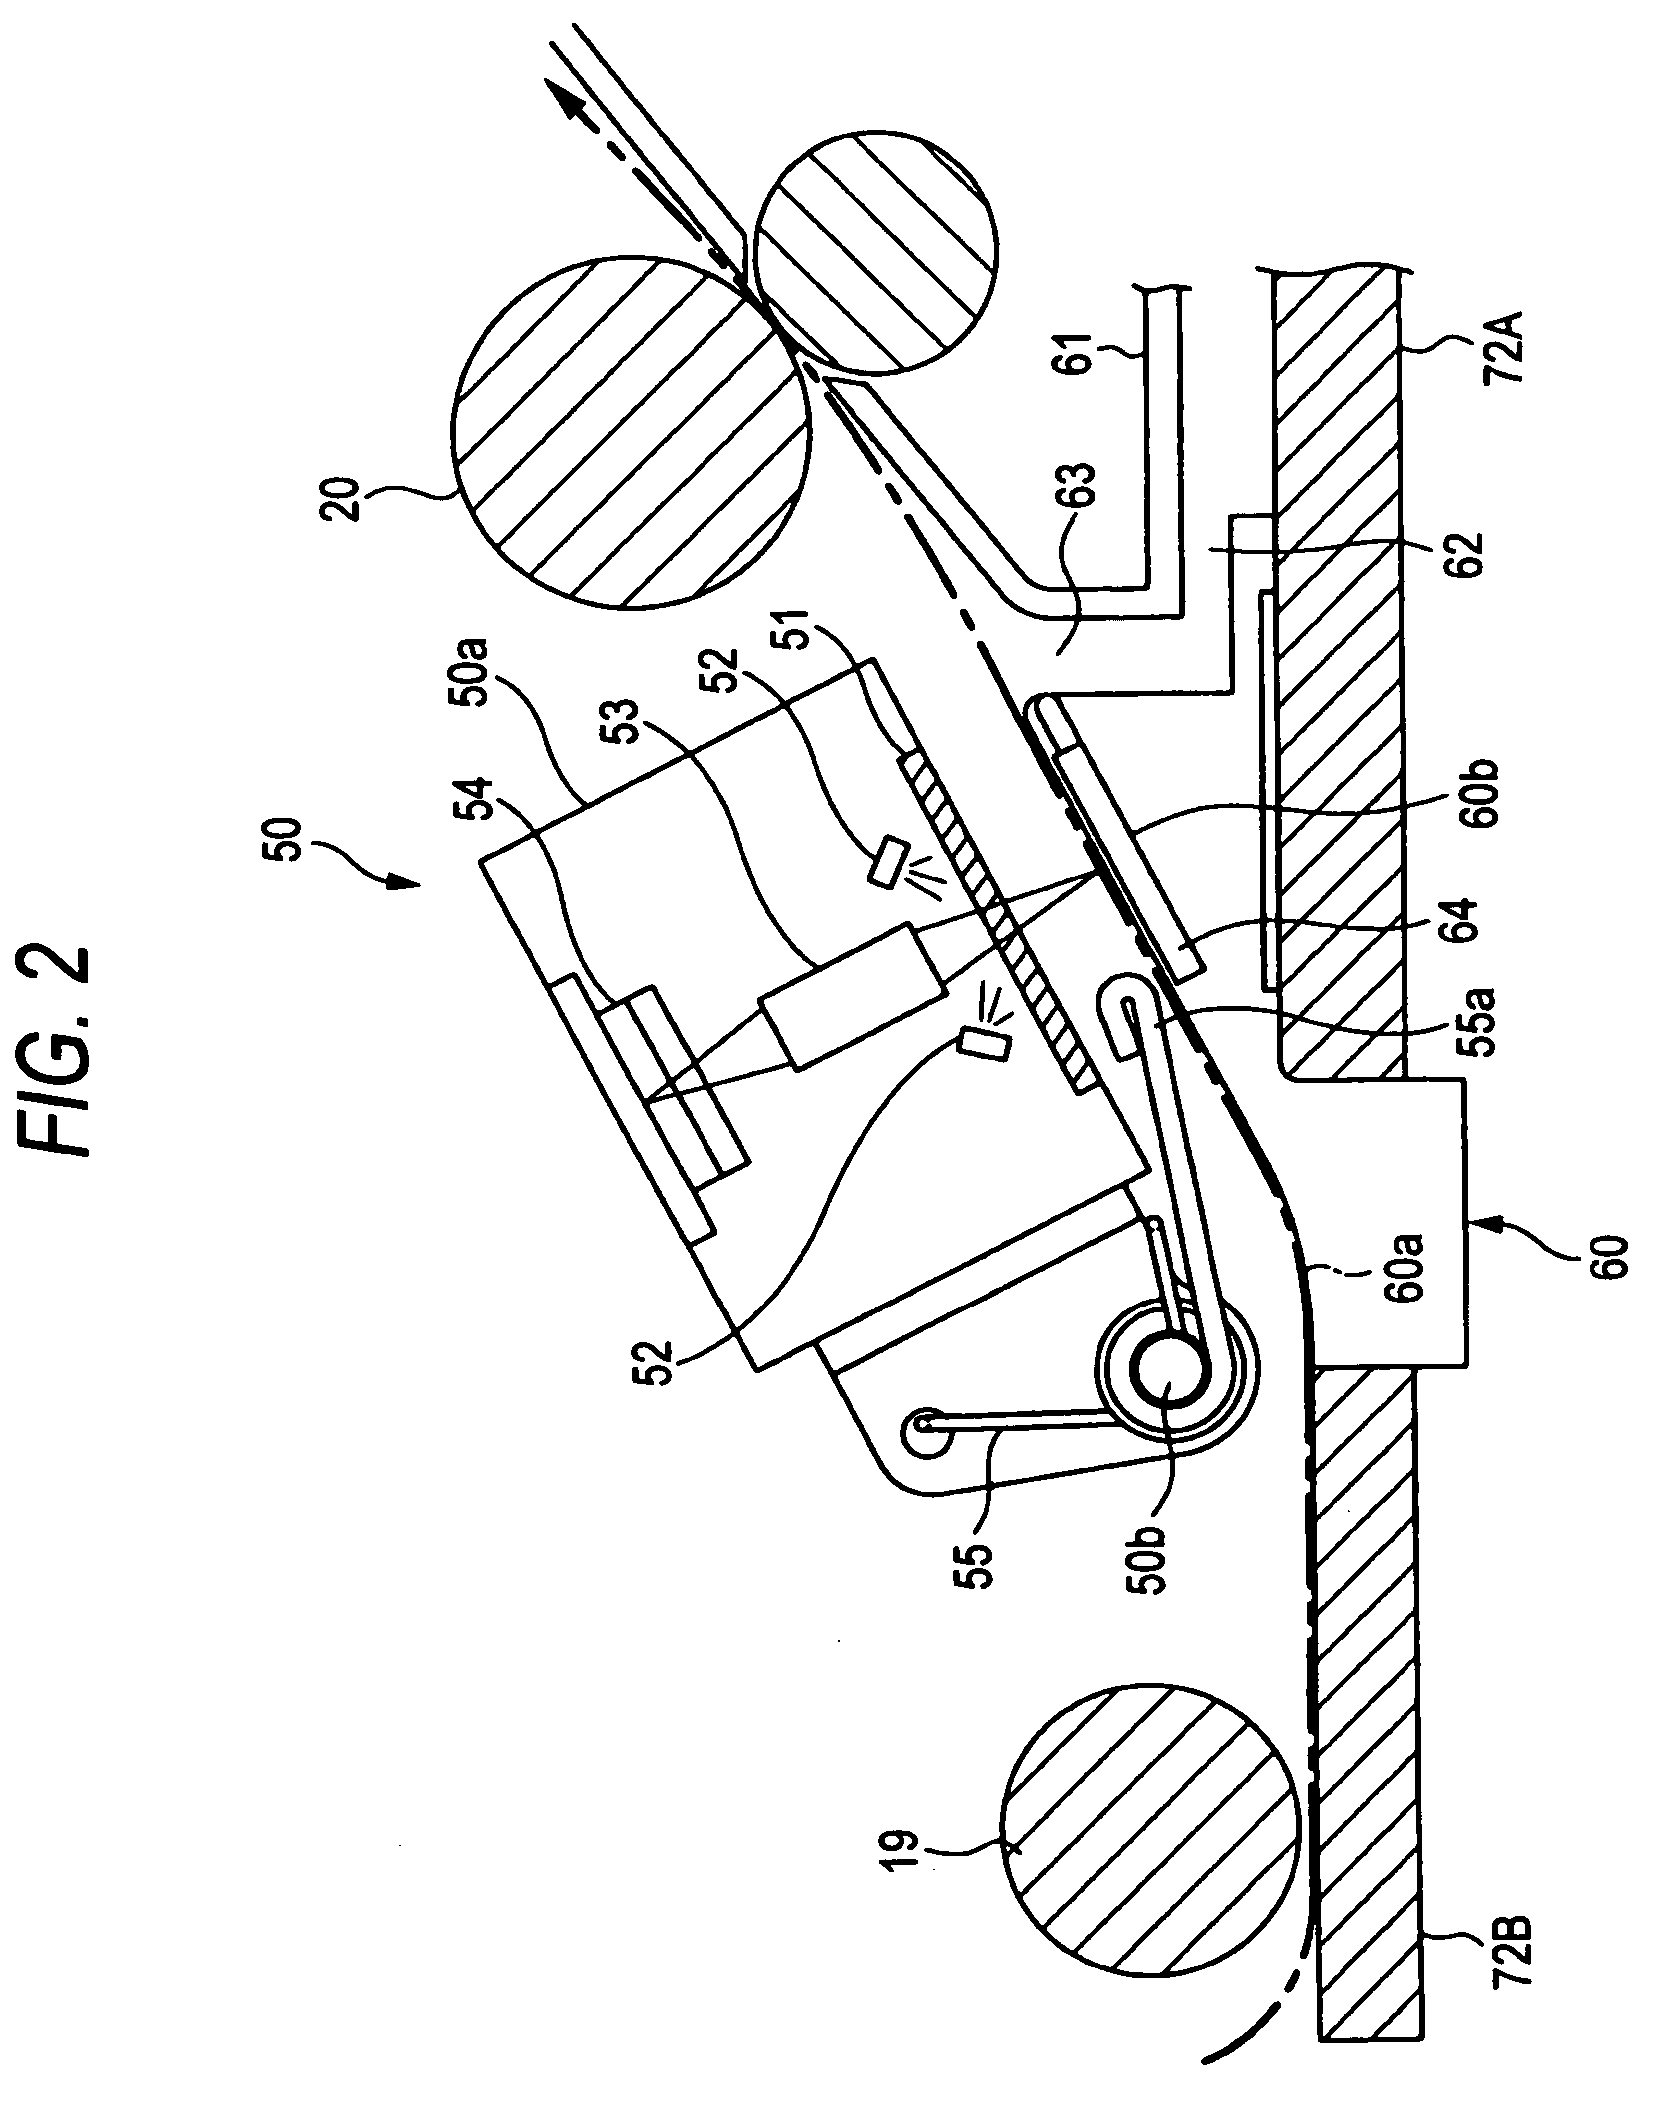 Image reading apparatus and reference member foreign matter detecting method